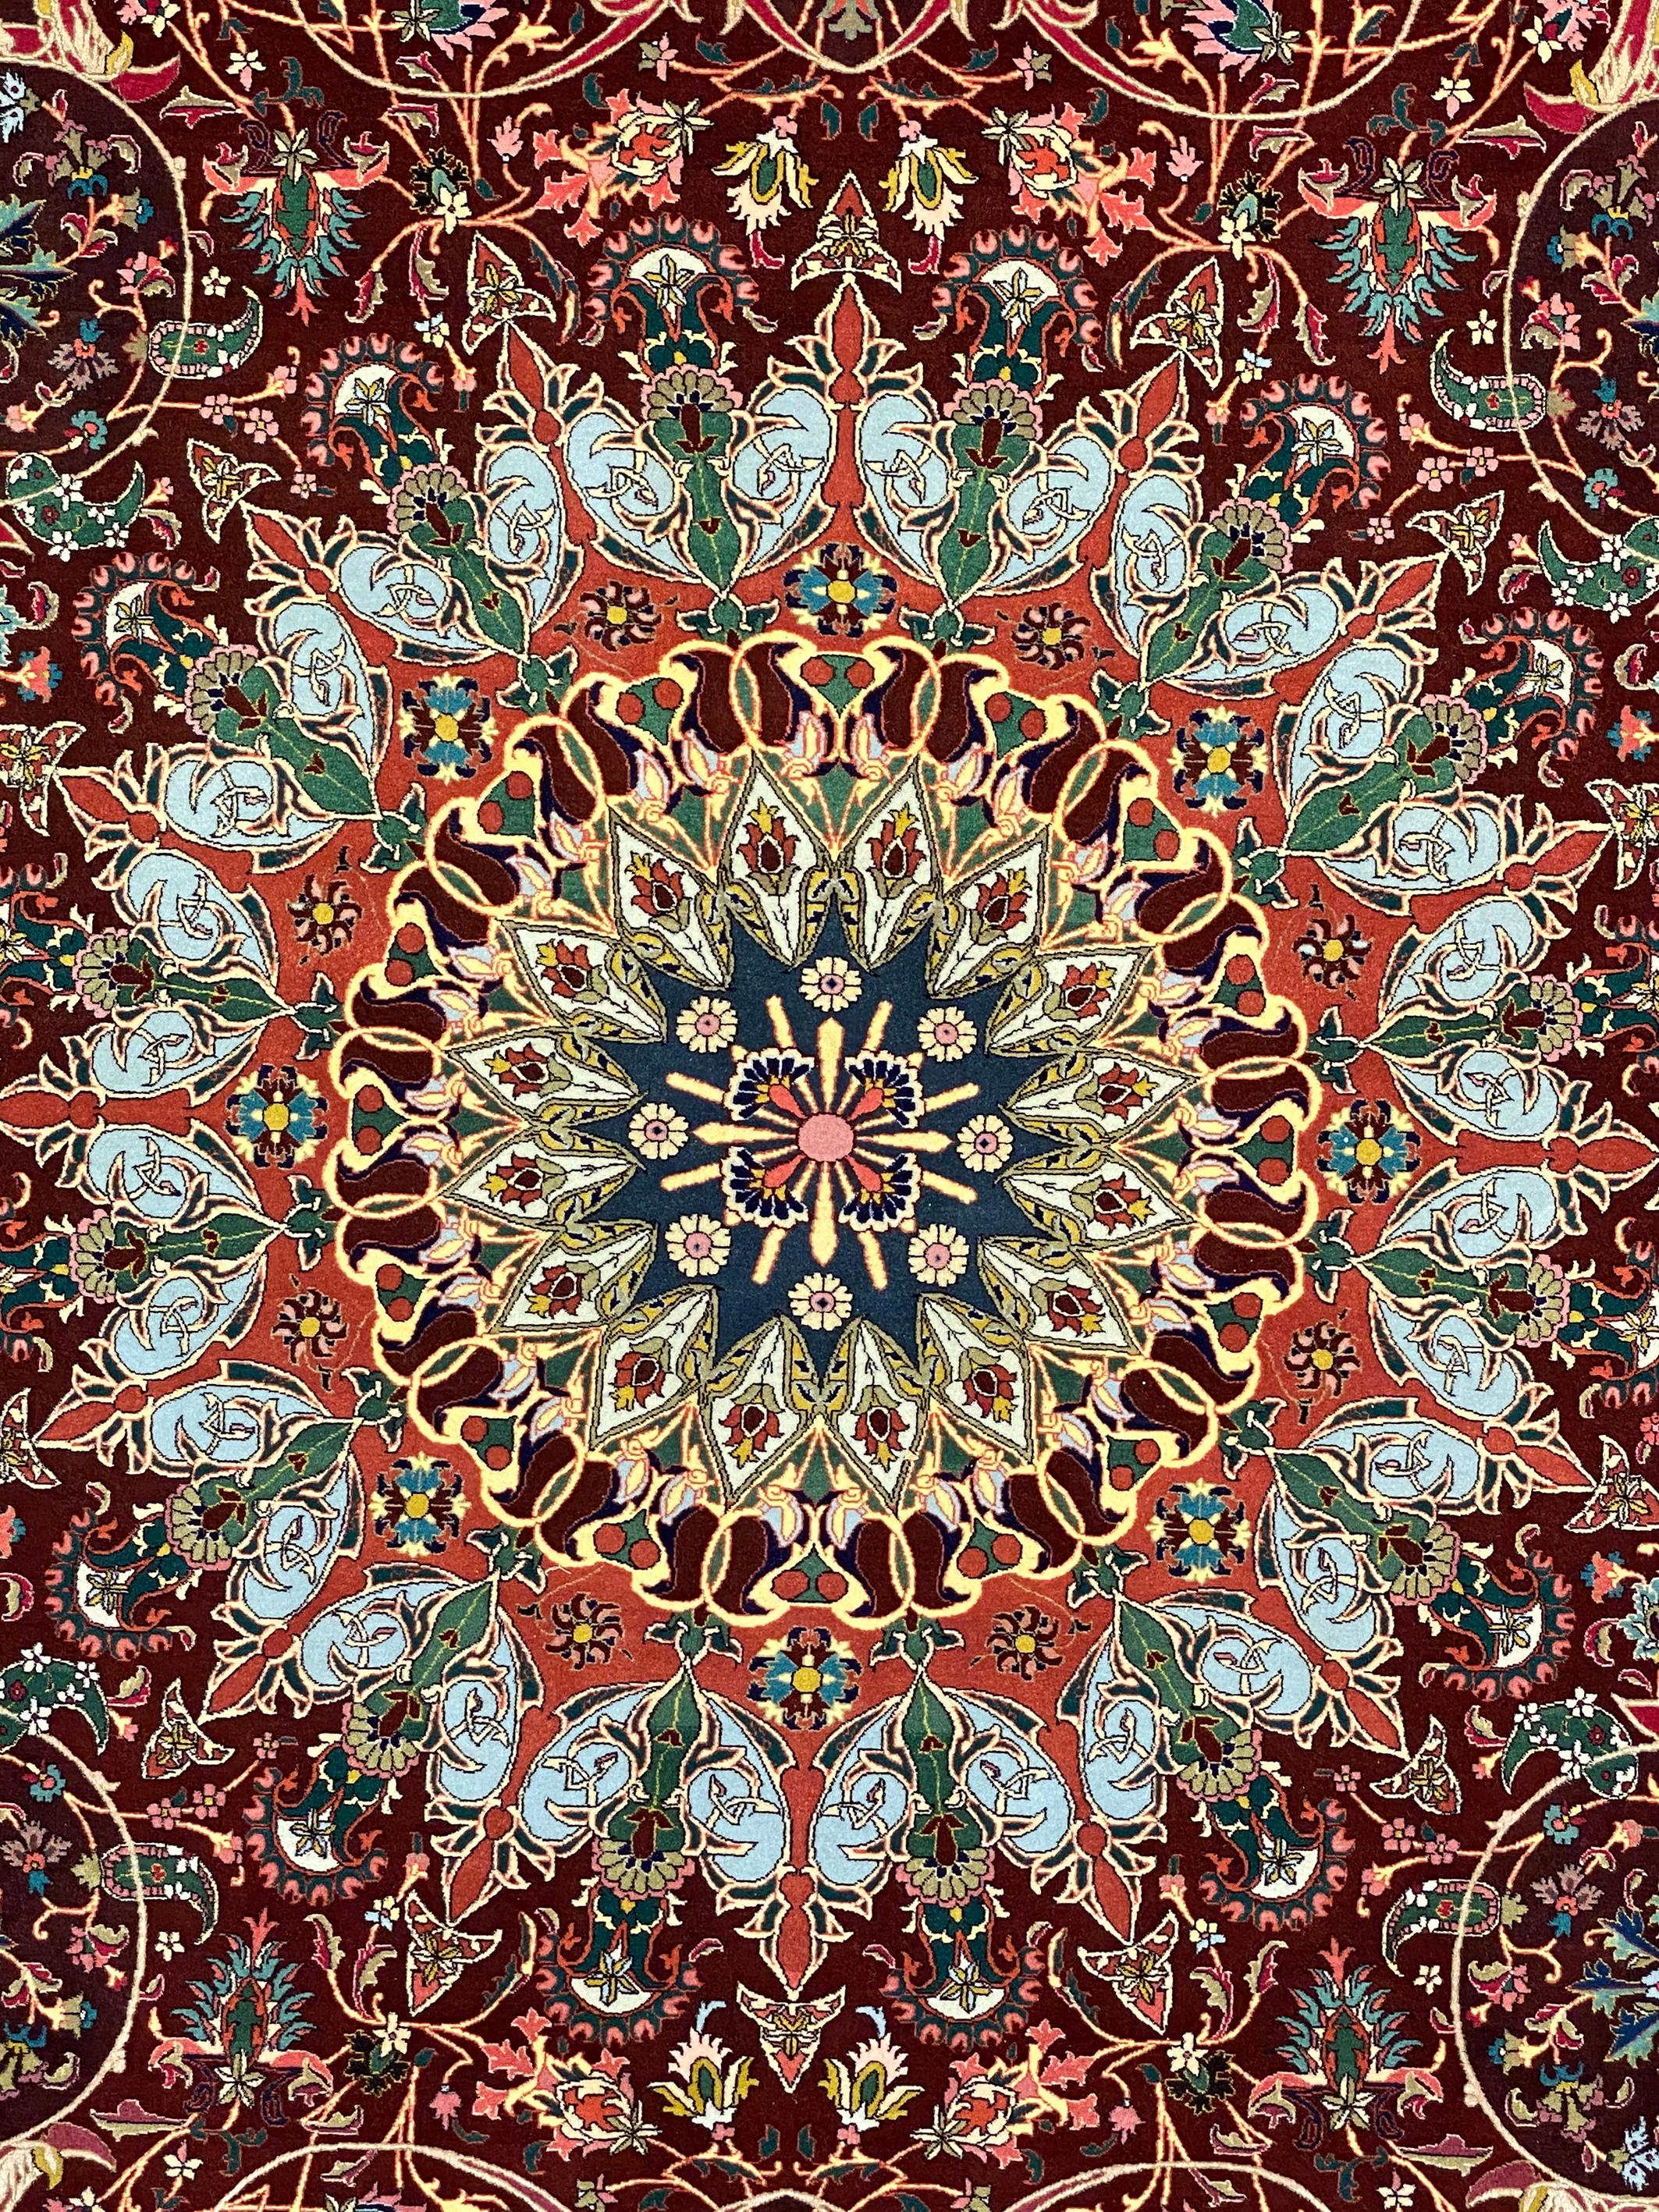 In excellent condition, this Tremendous Tabriz is rare to find. Hand knotted with wonderful soft kork wool and silk highlights, balanced color combination, and extremely fine technique of weave. The high technique allows for above-and-beyond detail